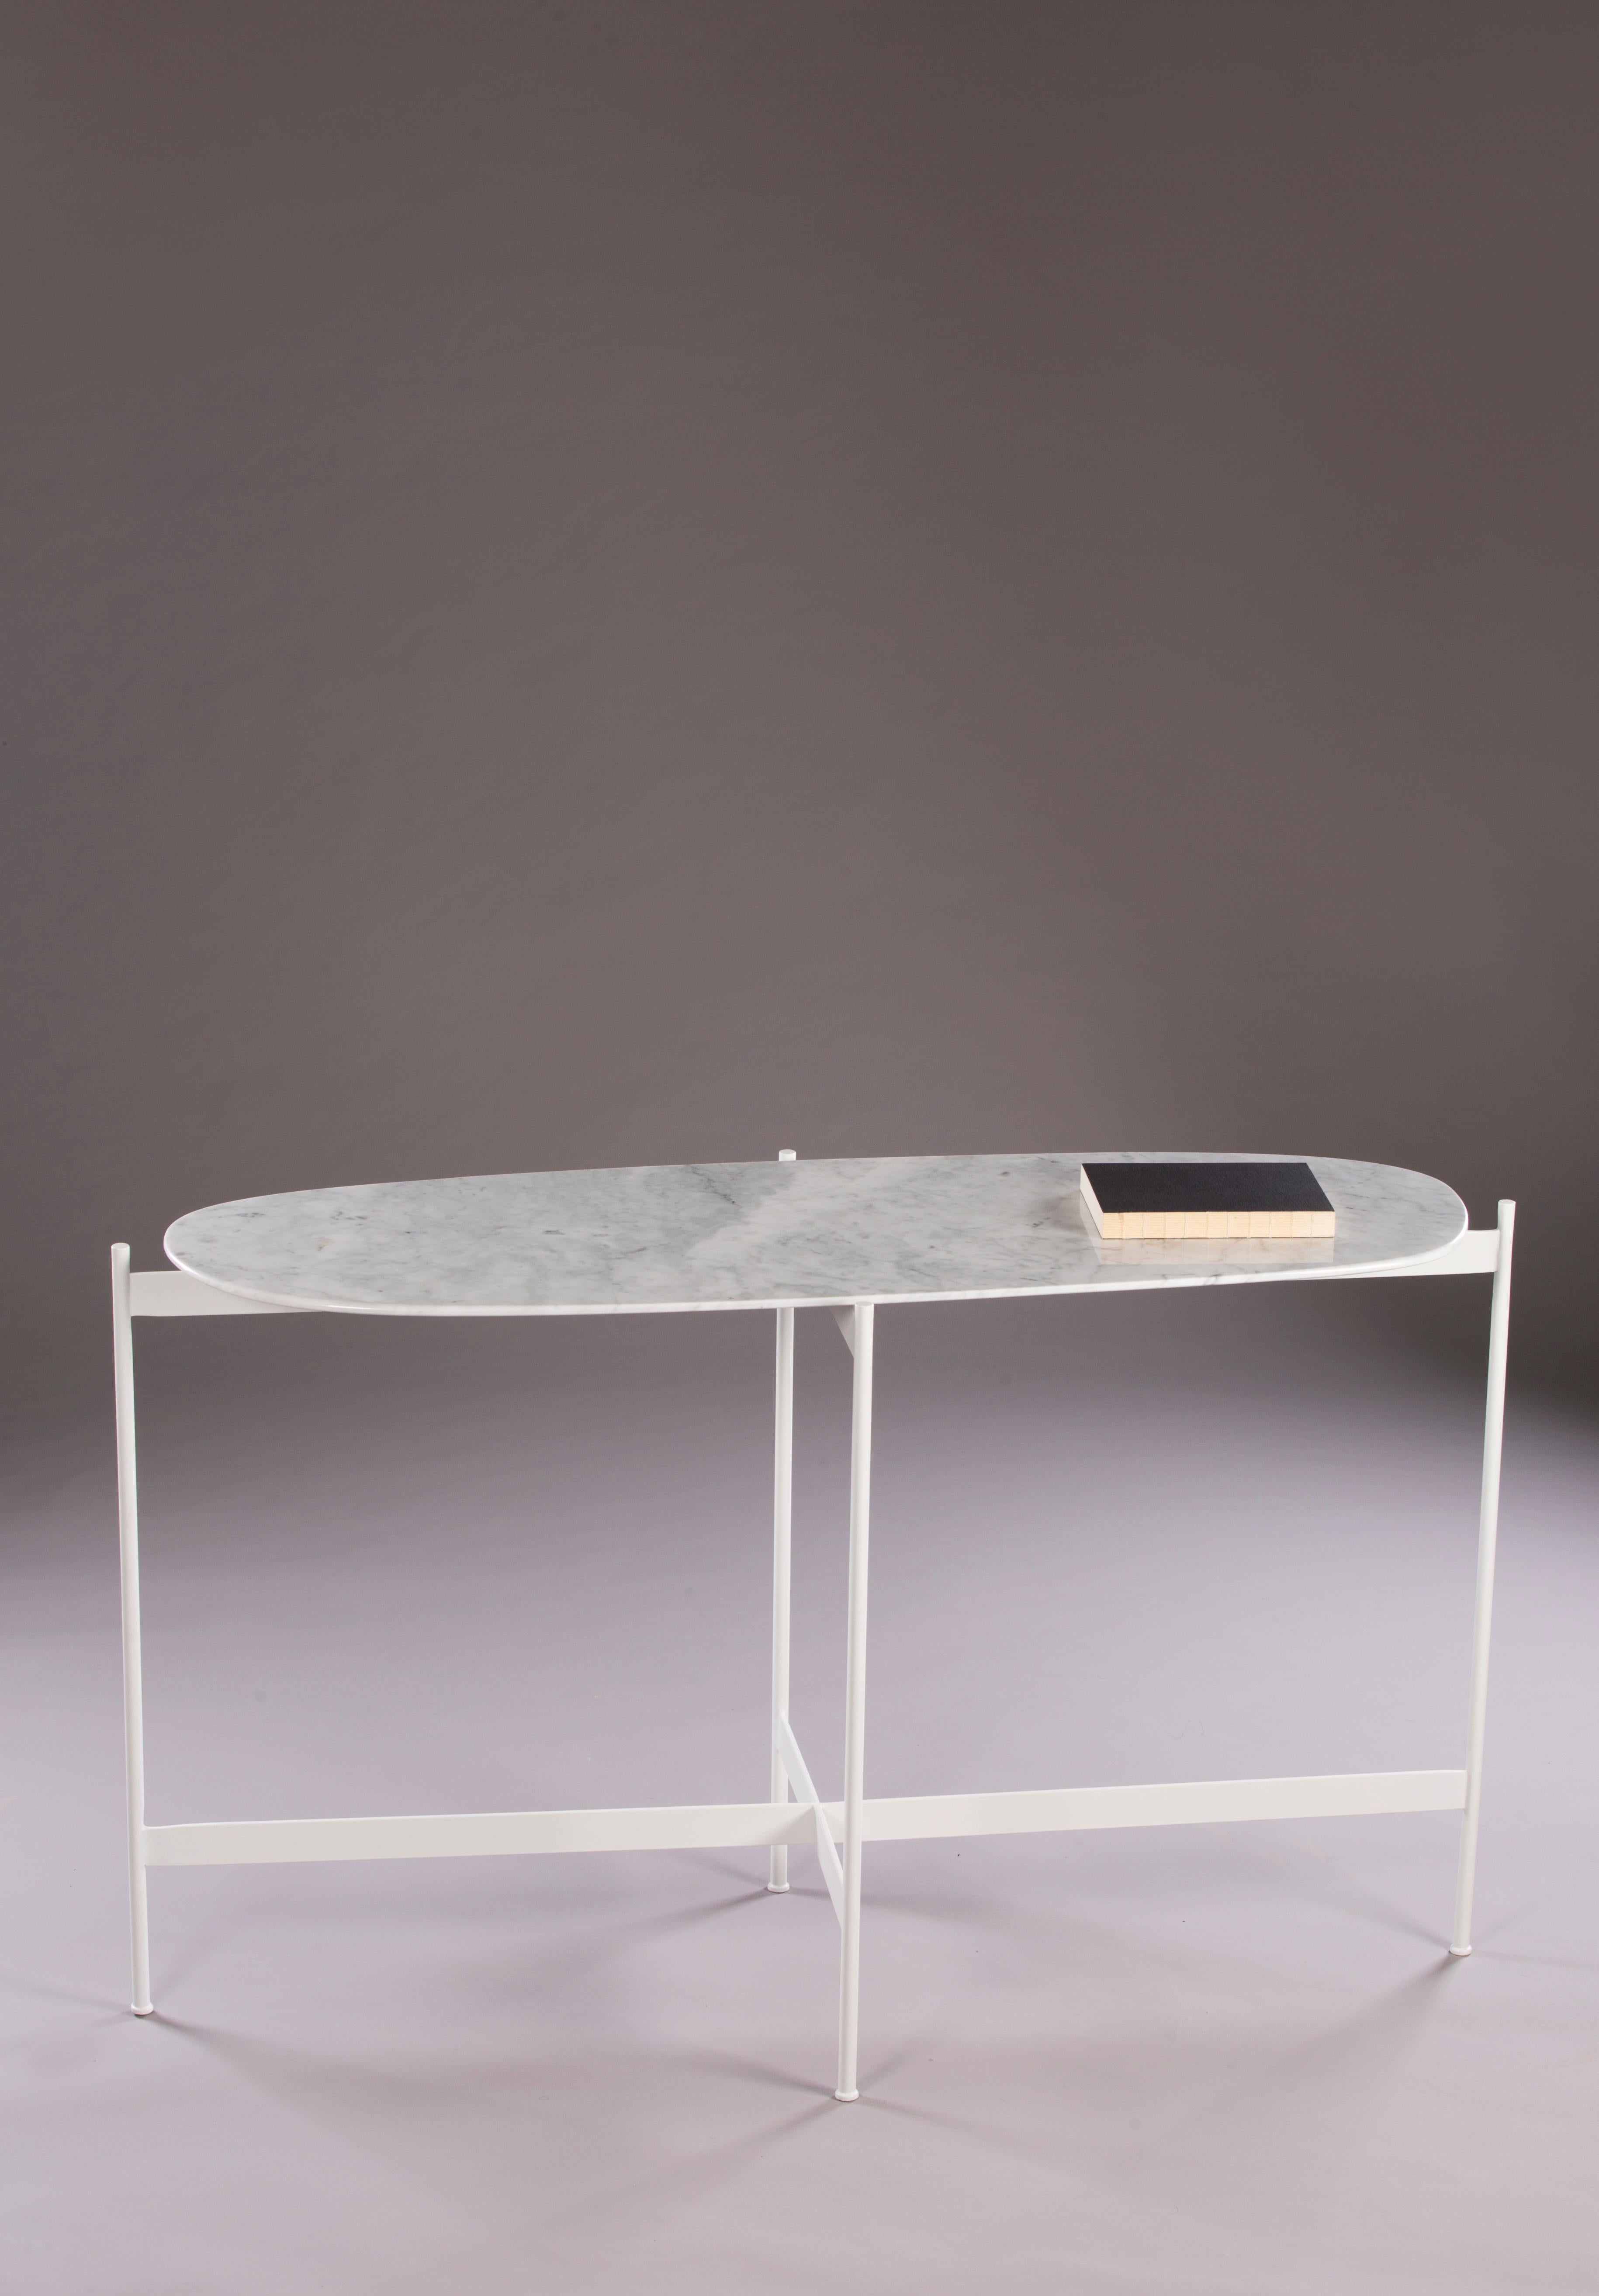 Tas console by Rectangle Studio
Dimensions: W 125 x D 45 x H 75 cm 
Materials: White marble, white paint coating on metal

The table is shaped and finished by the designer. For this reason, each table has different and distinctive edge finishes.